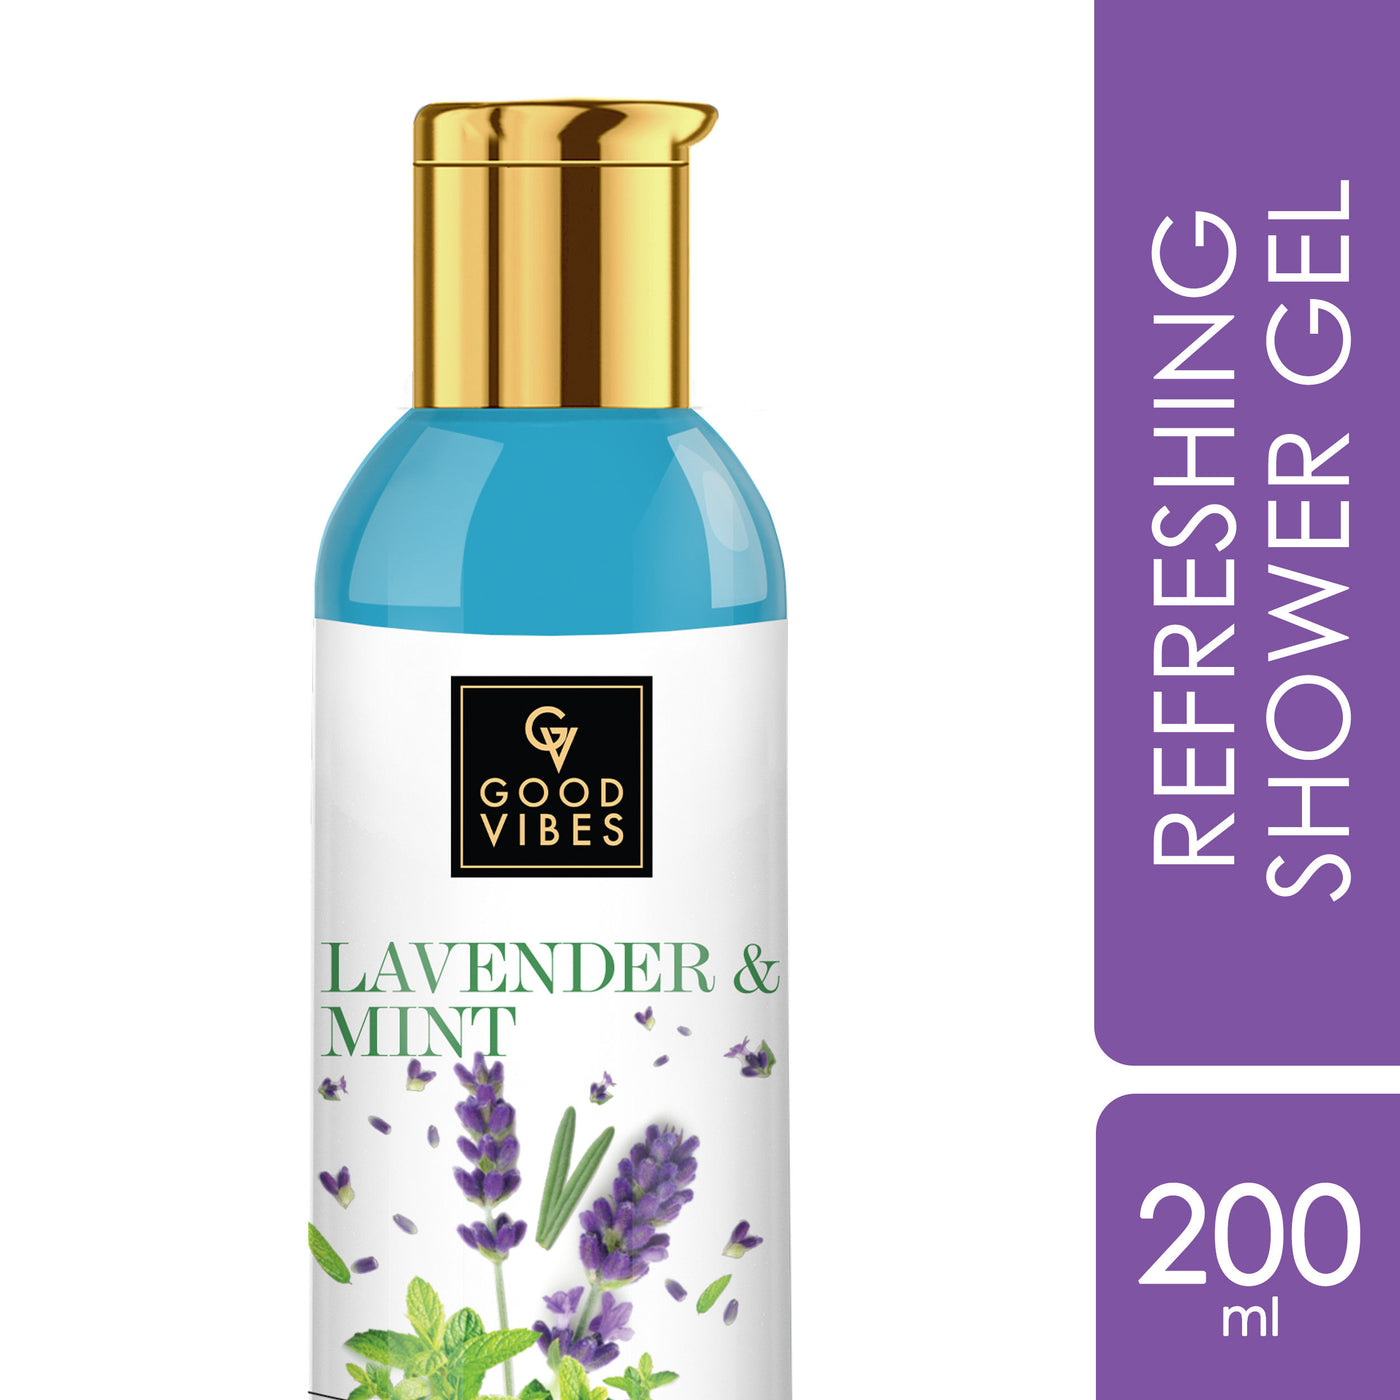 good-vibes-refreshing-shower-gel-lavender-and-mint-200-ml-2-16-1